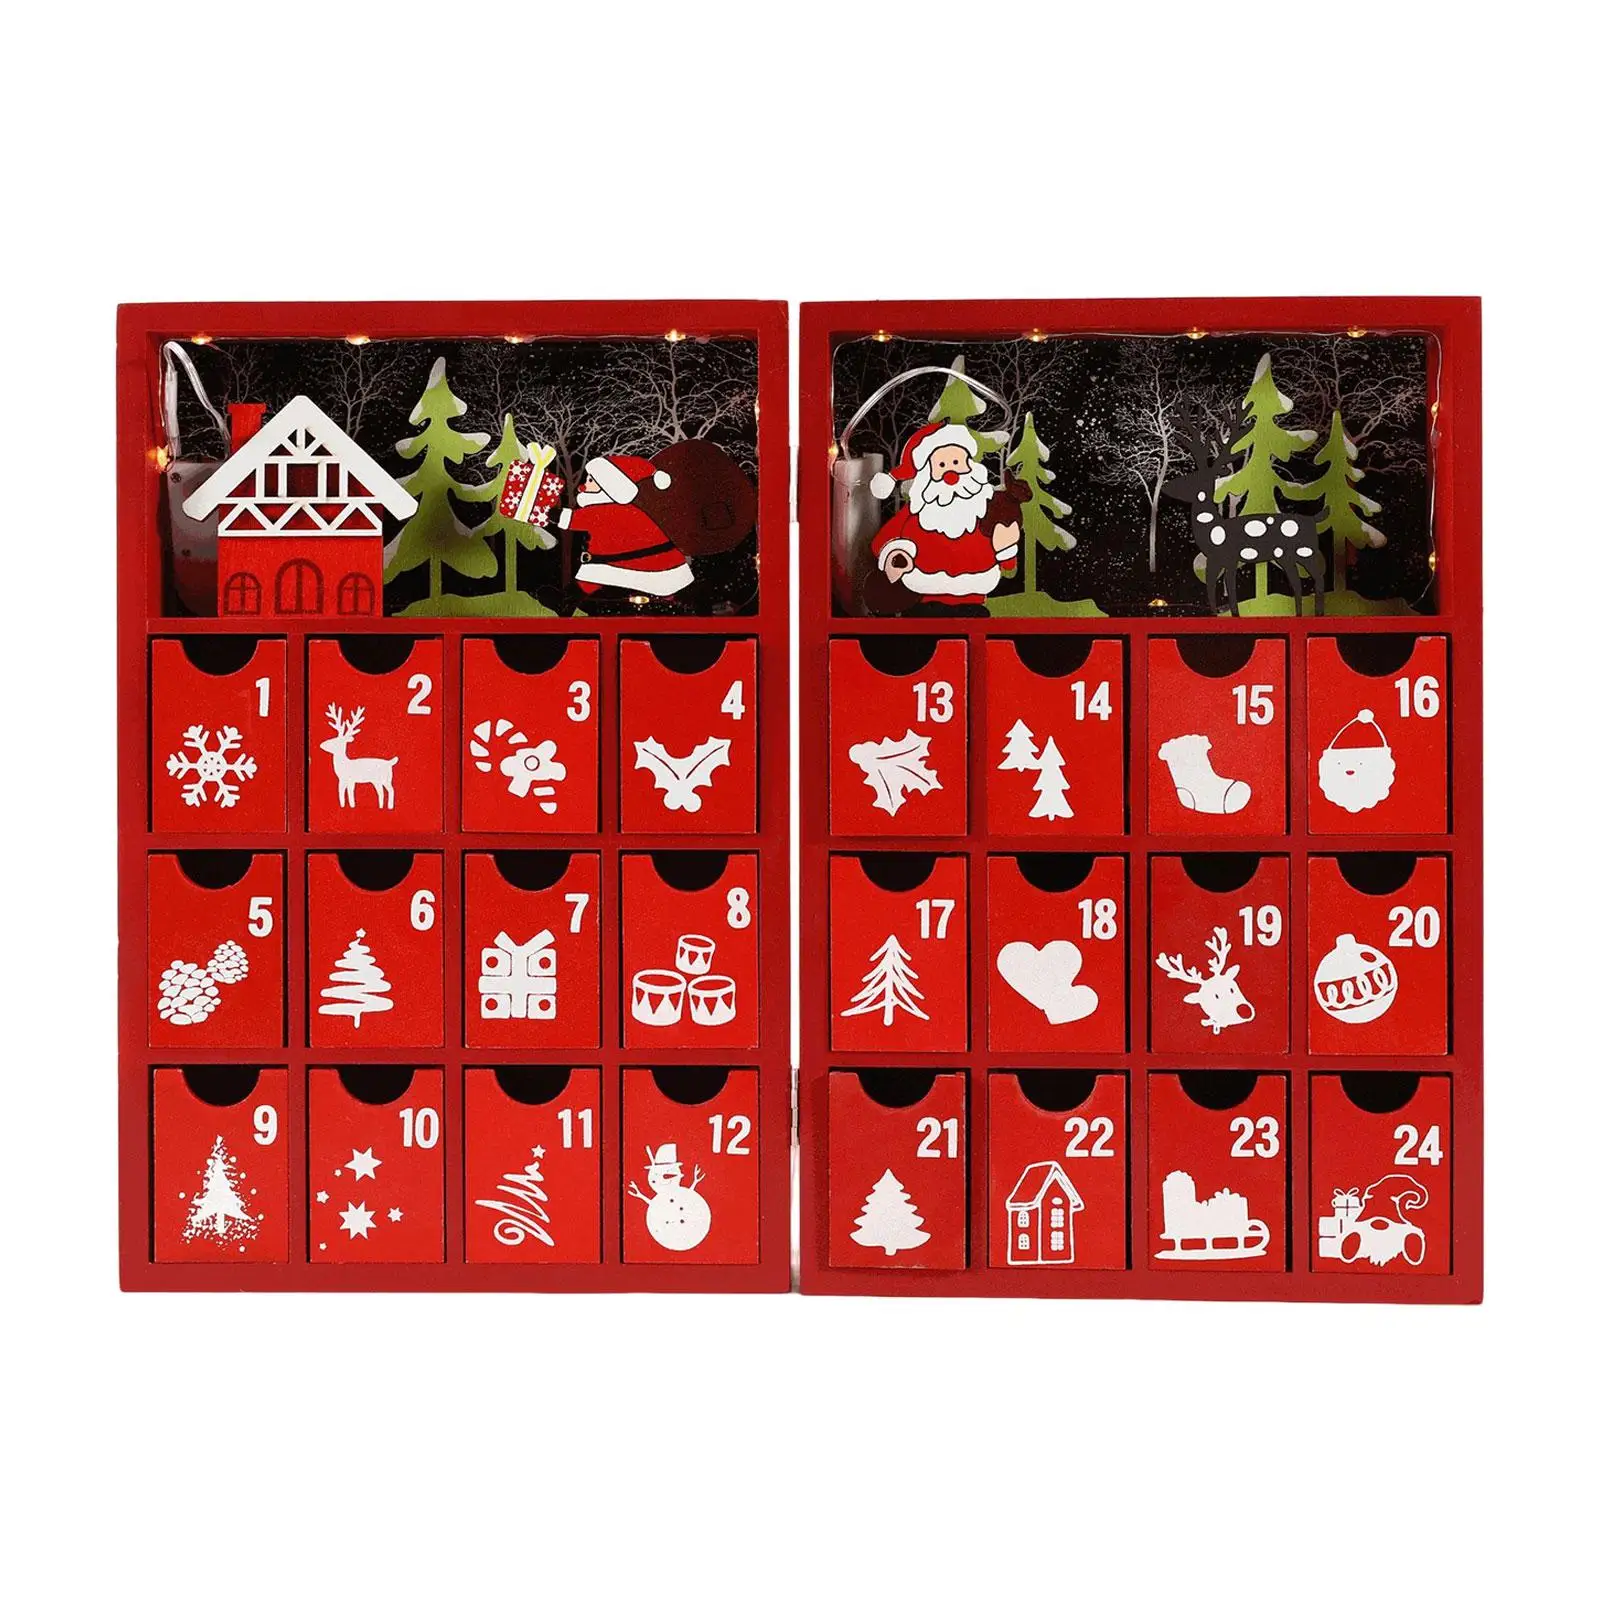 Wooden 24 Days of Advent Calendar Candy Organizer Santa Claus Pattern Fillable for Tabletop Holiday Desktop Home Ornaments